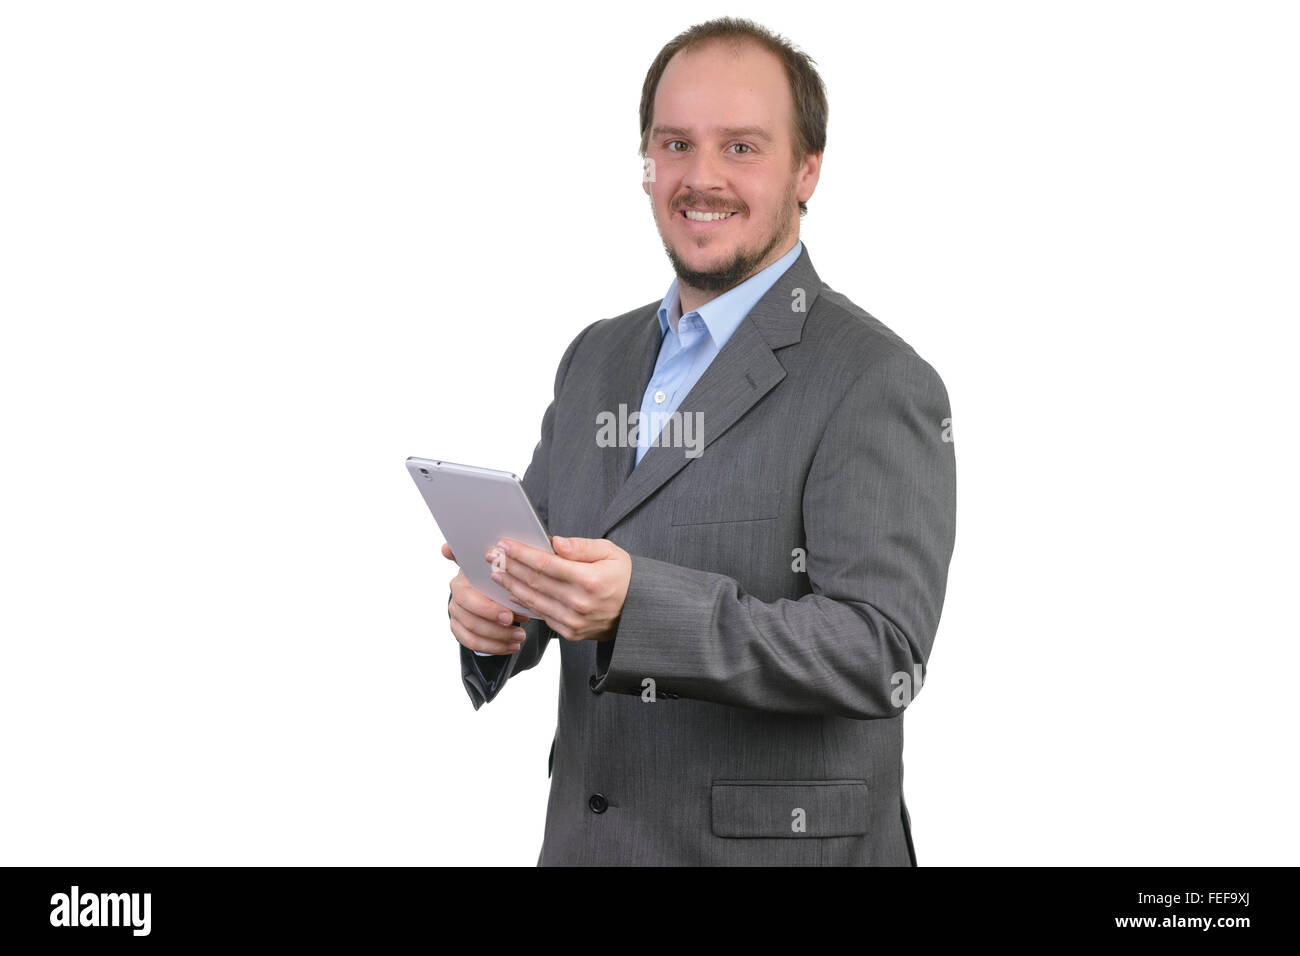 man dark gray suit smiling holding tablet computer Stock Photo